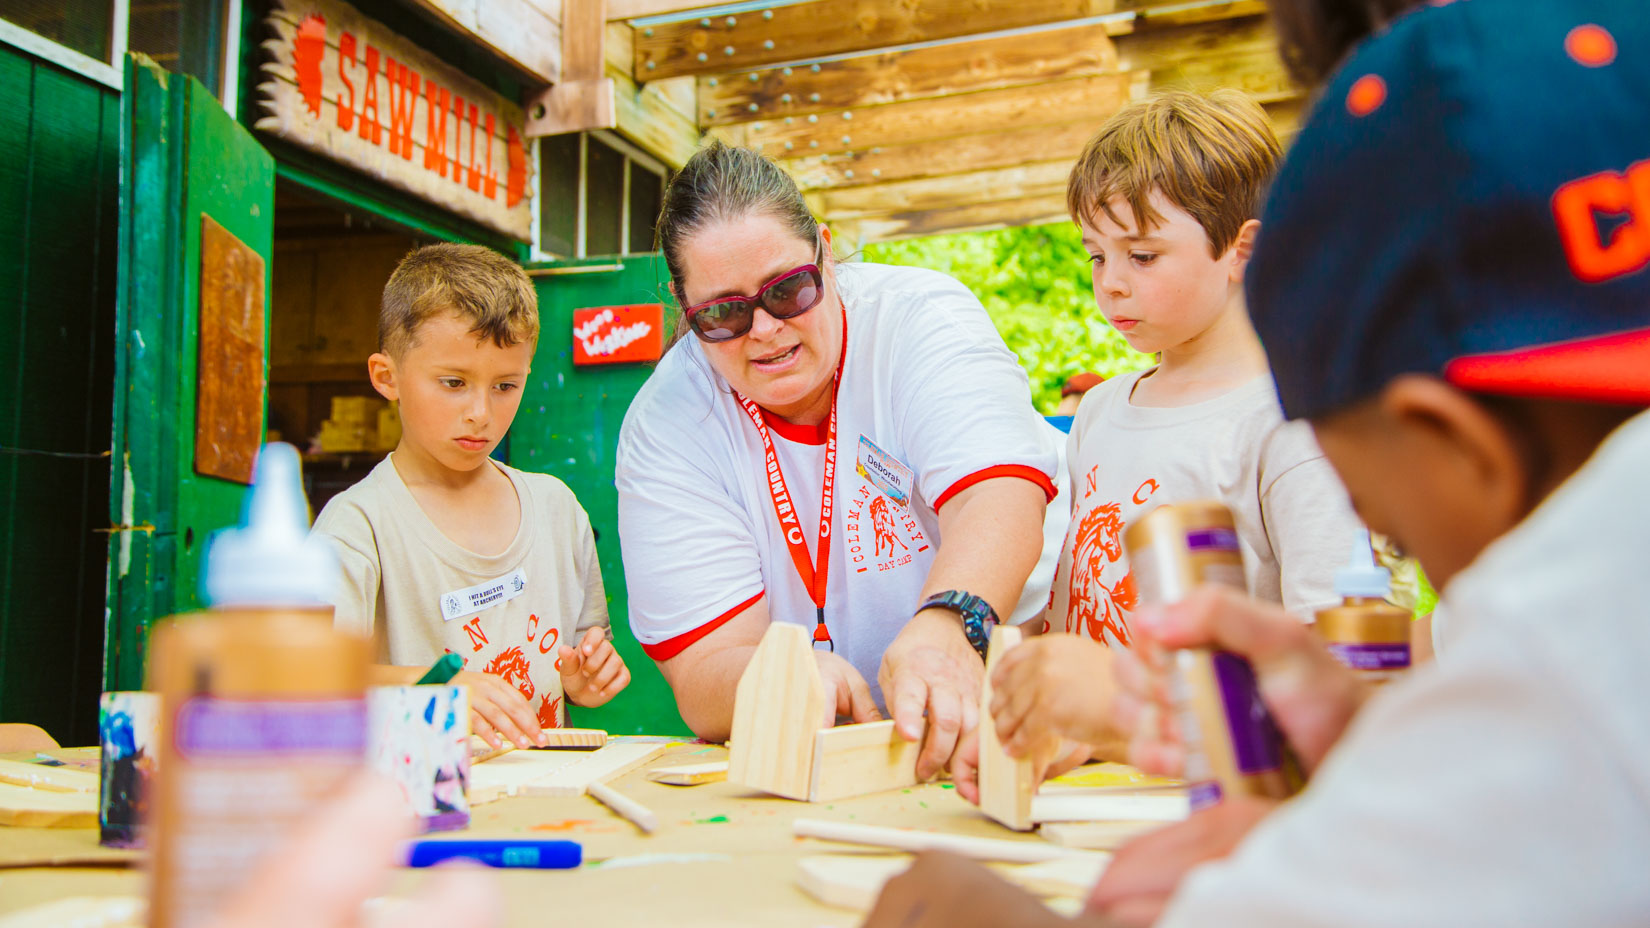 Woodworking counselor helps campers with projects